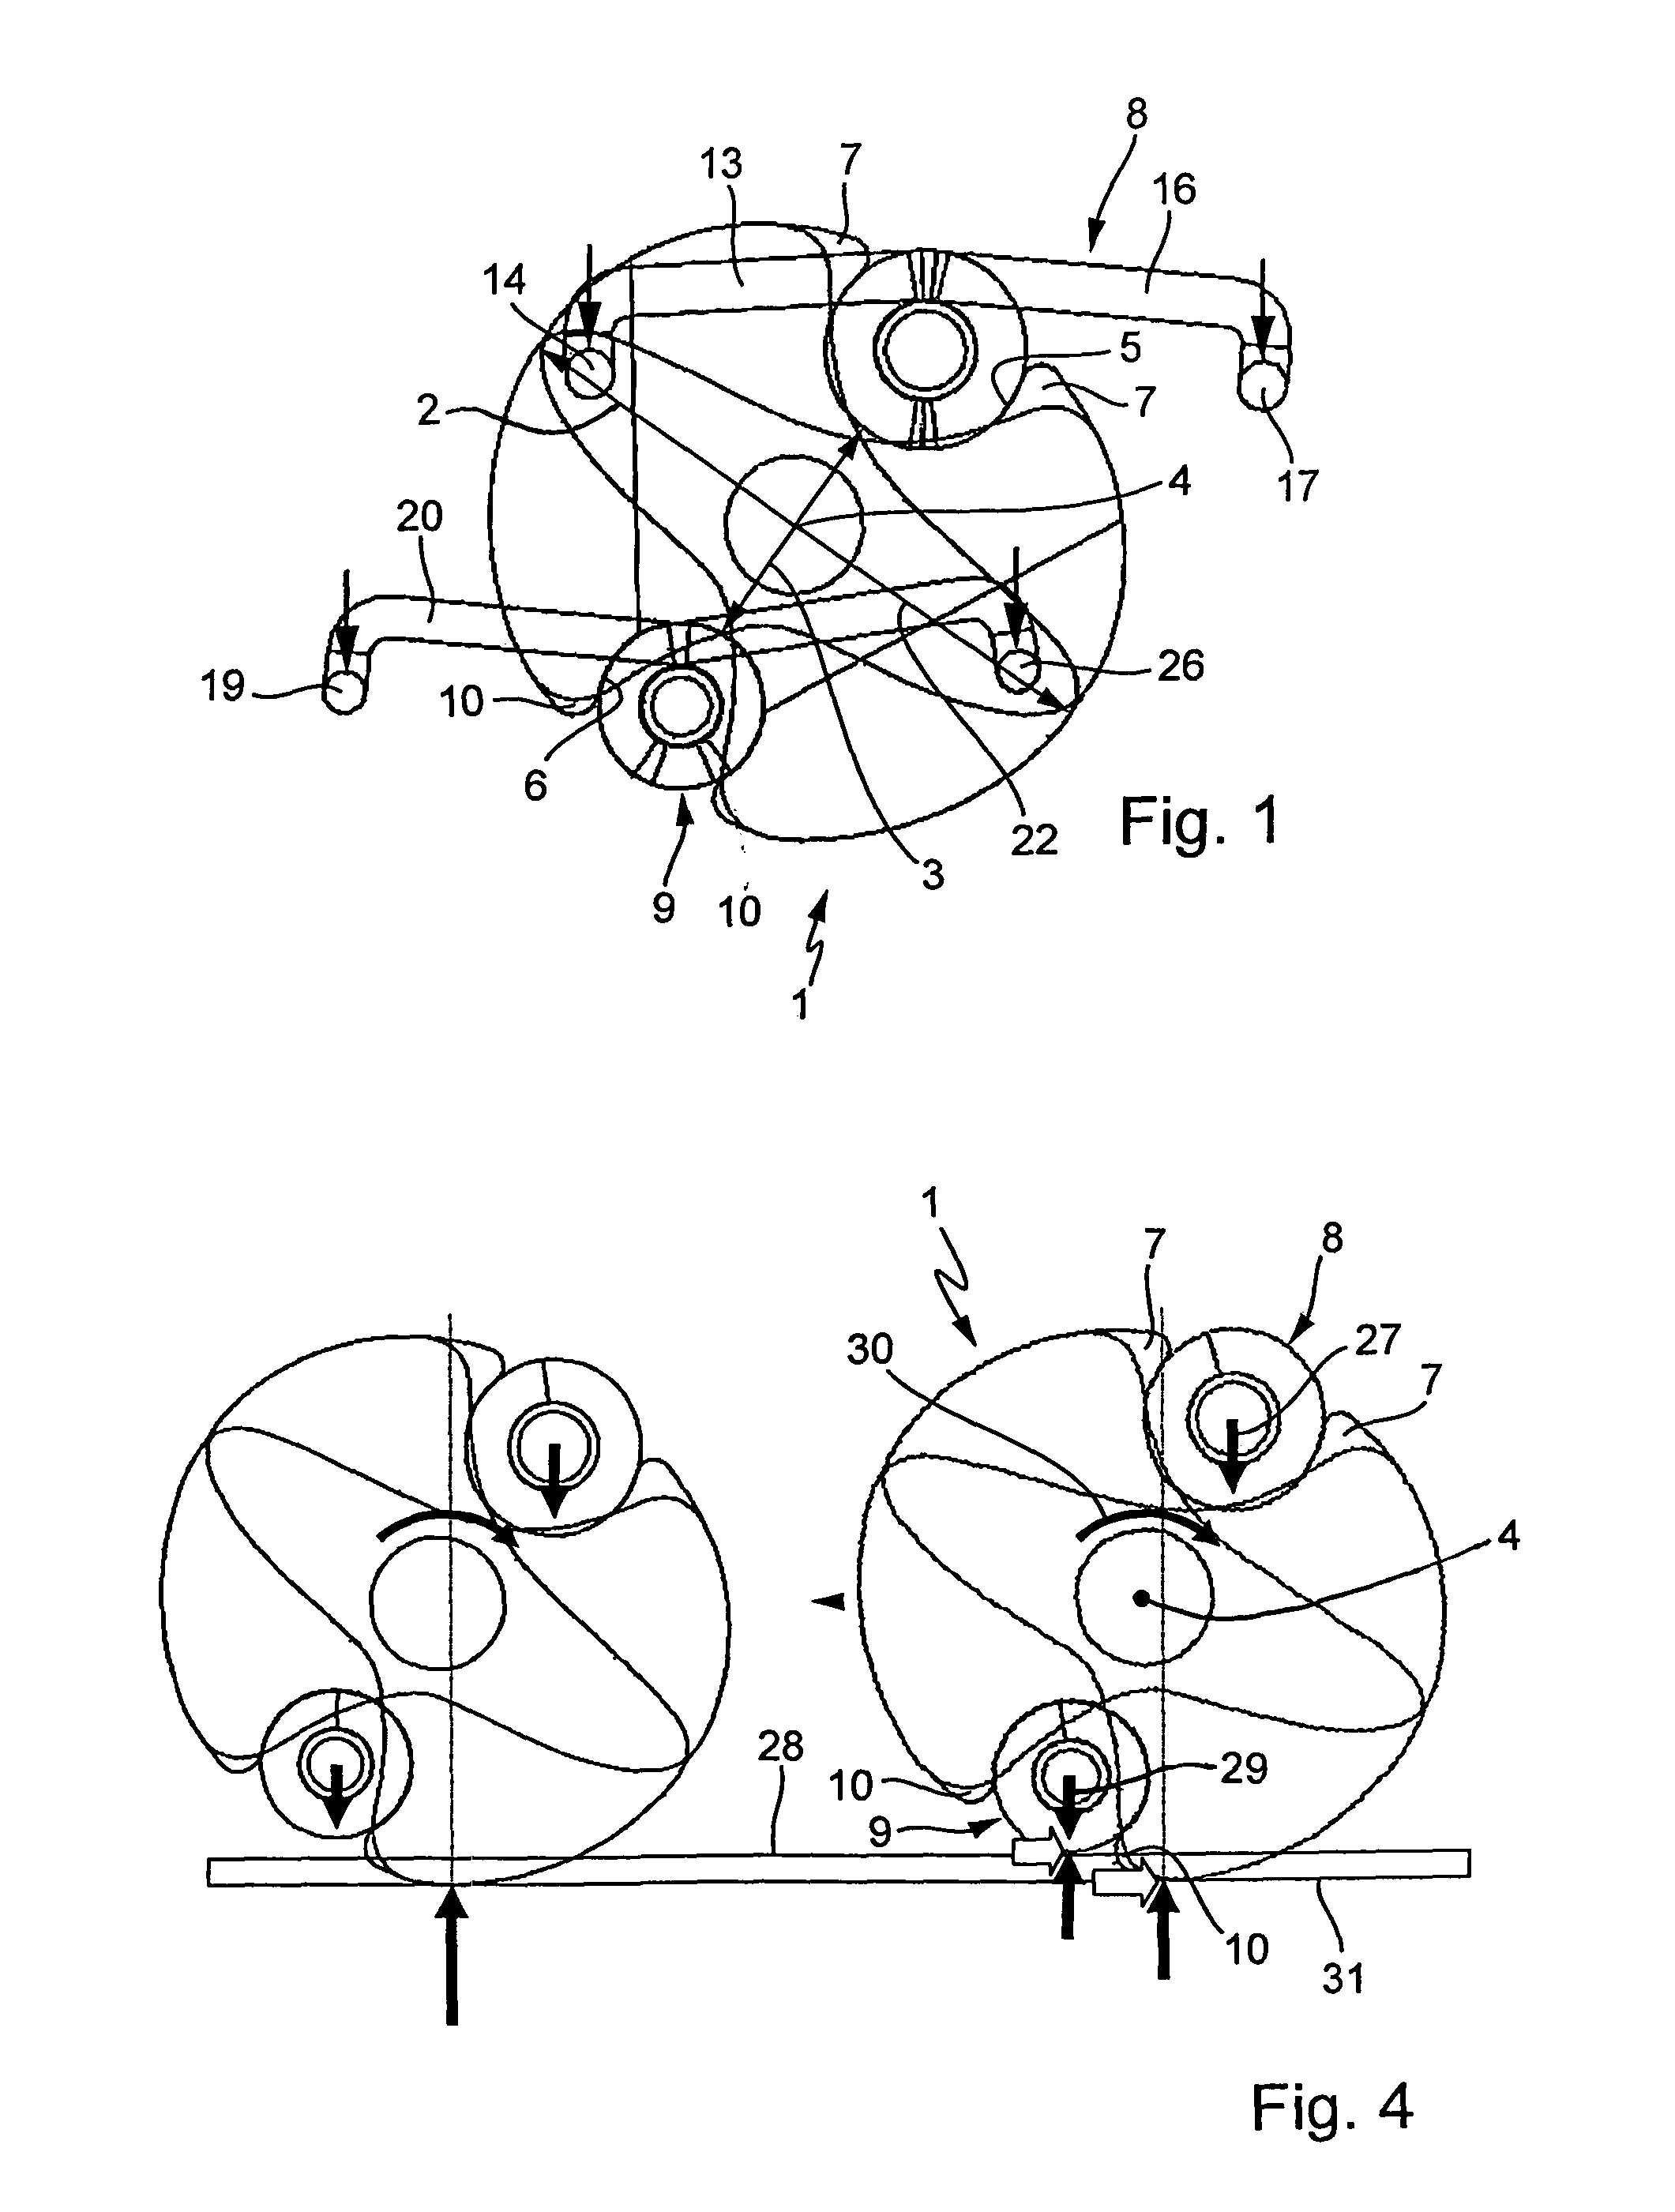 Switchable free-wheel arrangement for a transmission, particularly for a crank-CVT of a motor vehicle